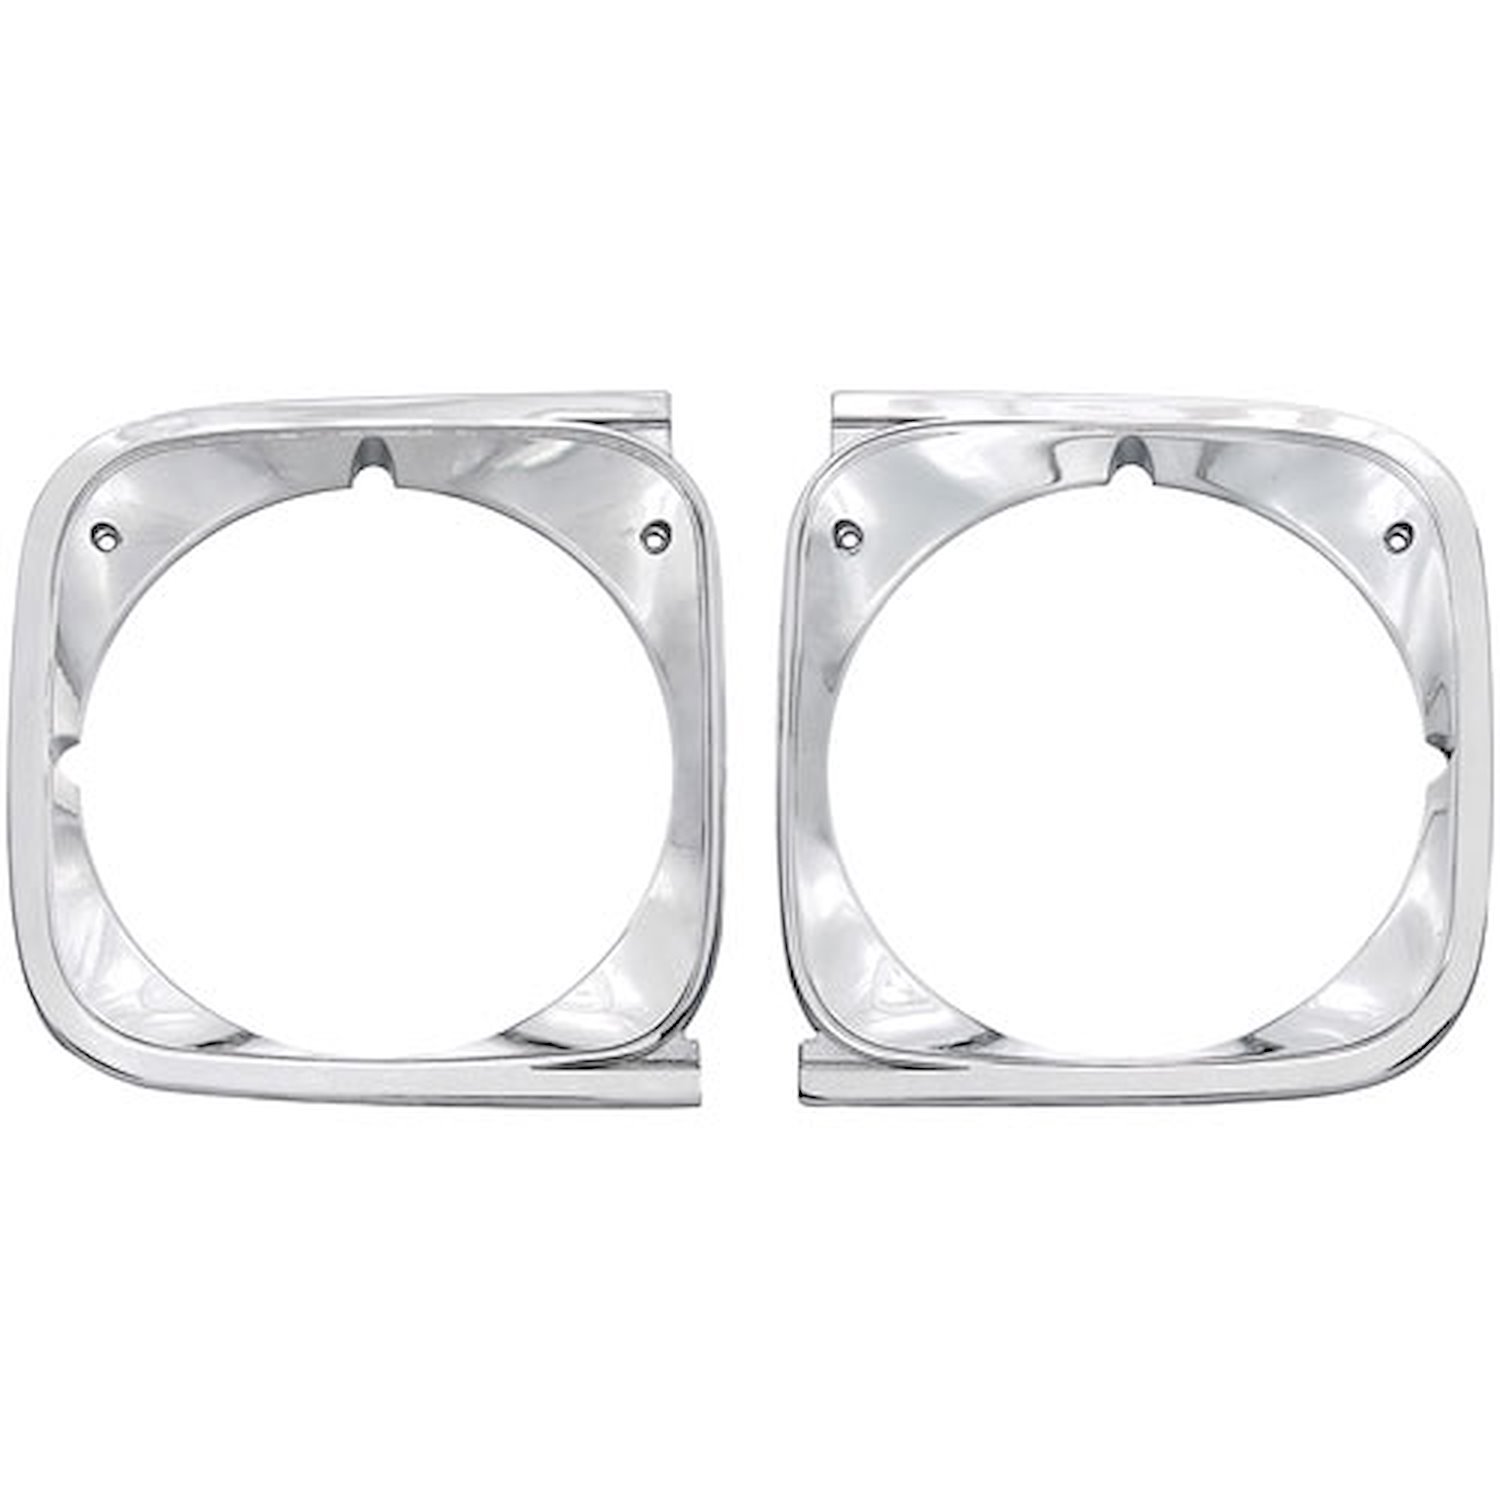 Headlamp Bezels for 1972 Chevy Chevelle, El Camino [Pair]